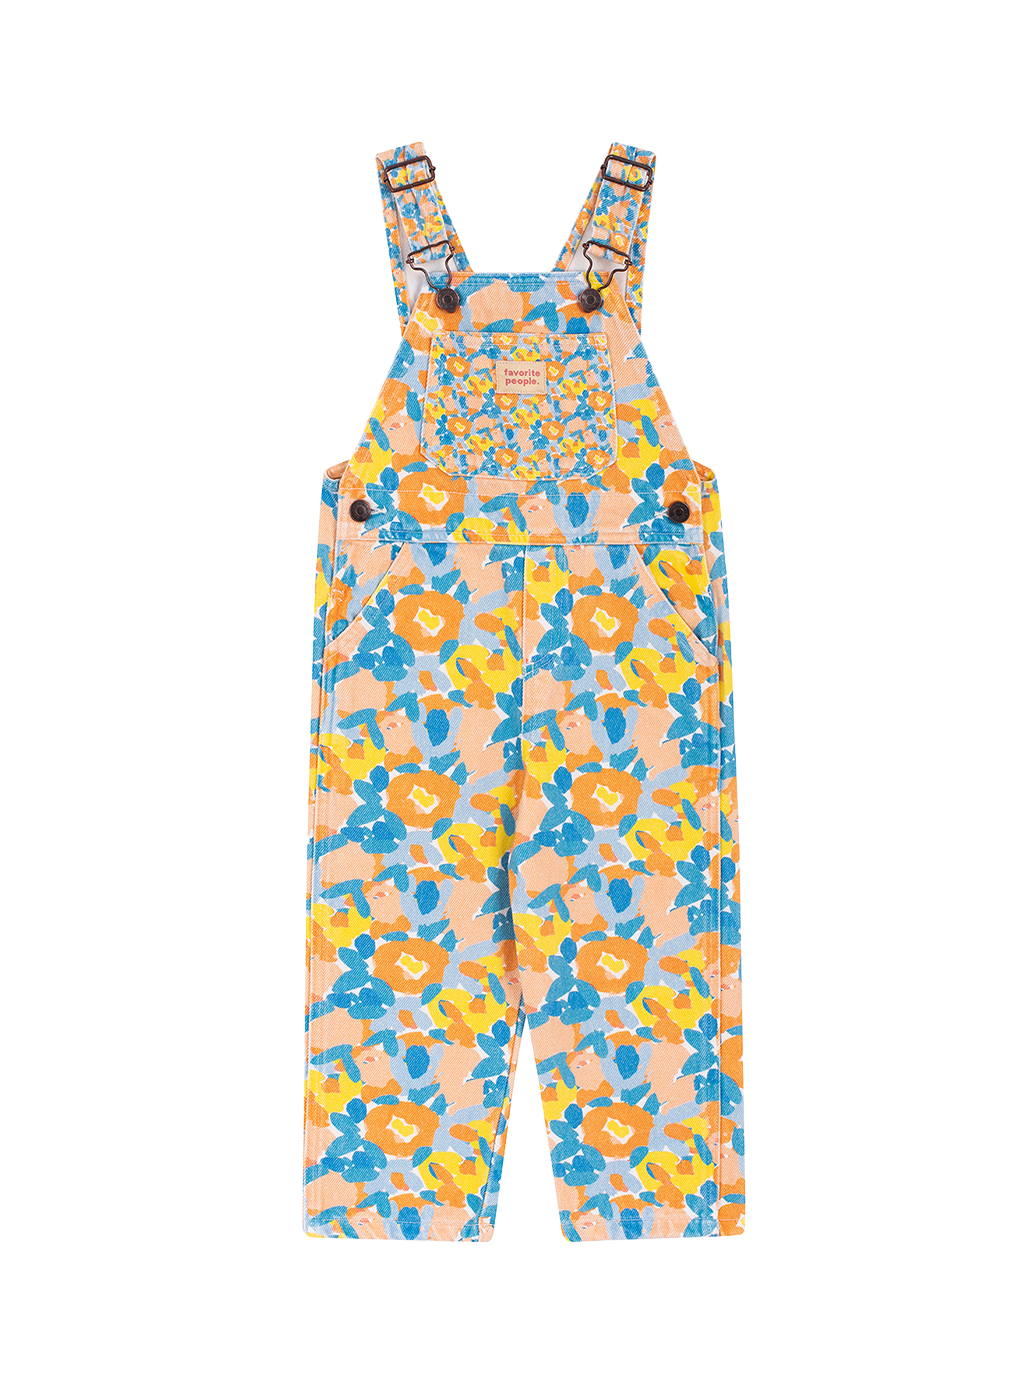 Dungarees for women